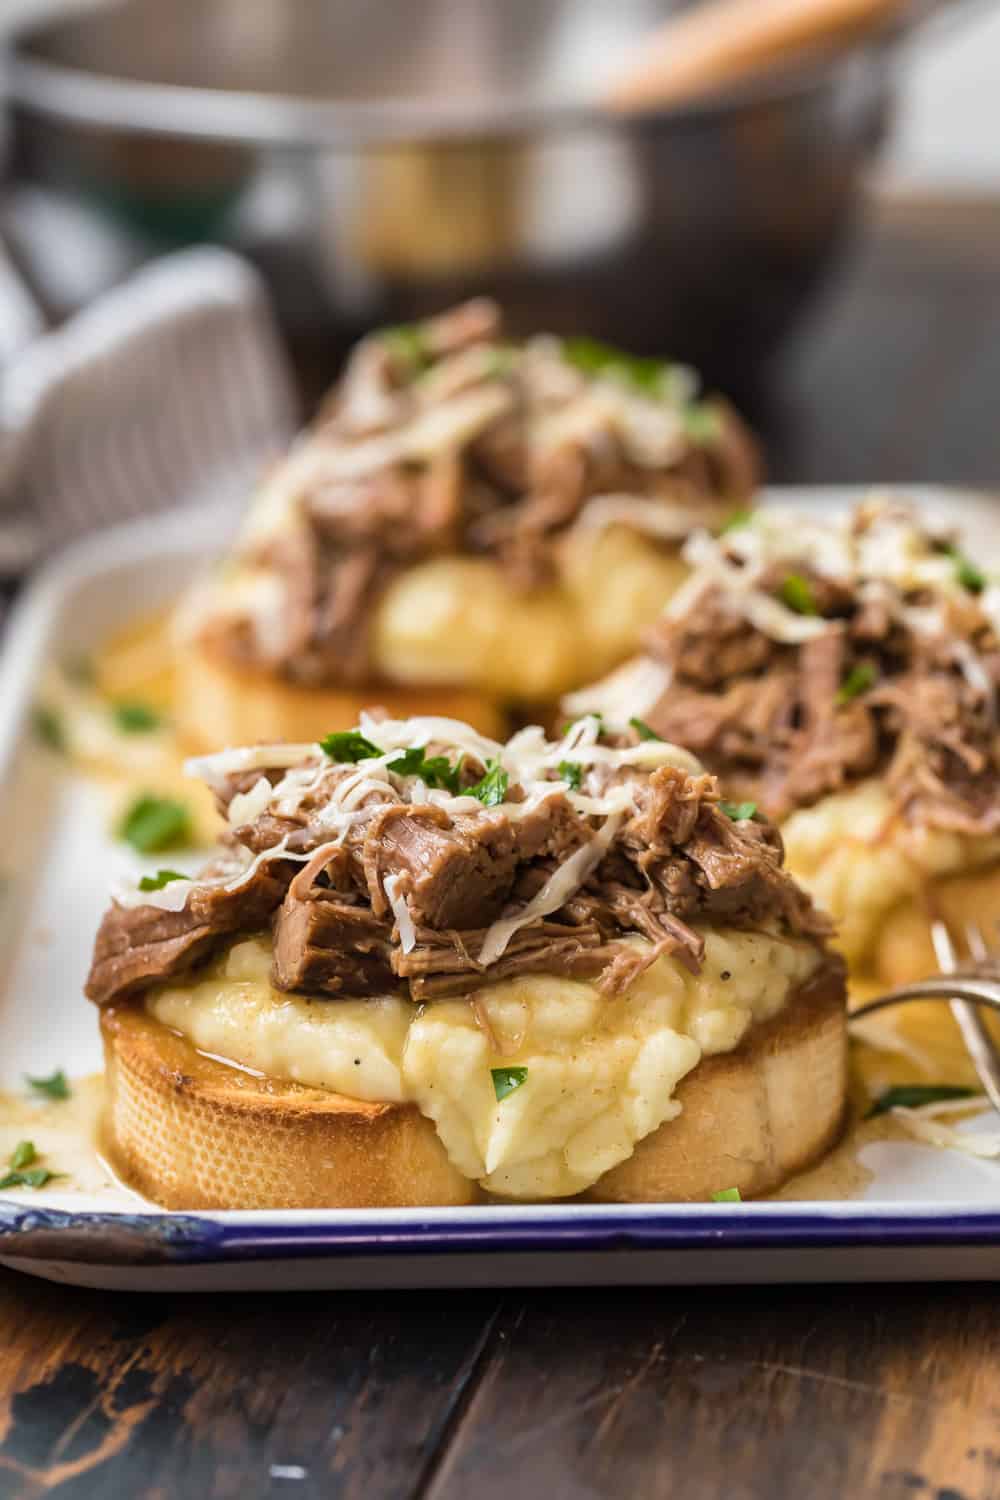 Close-up image of an Open-Faced Roast Beef Sandwich.